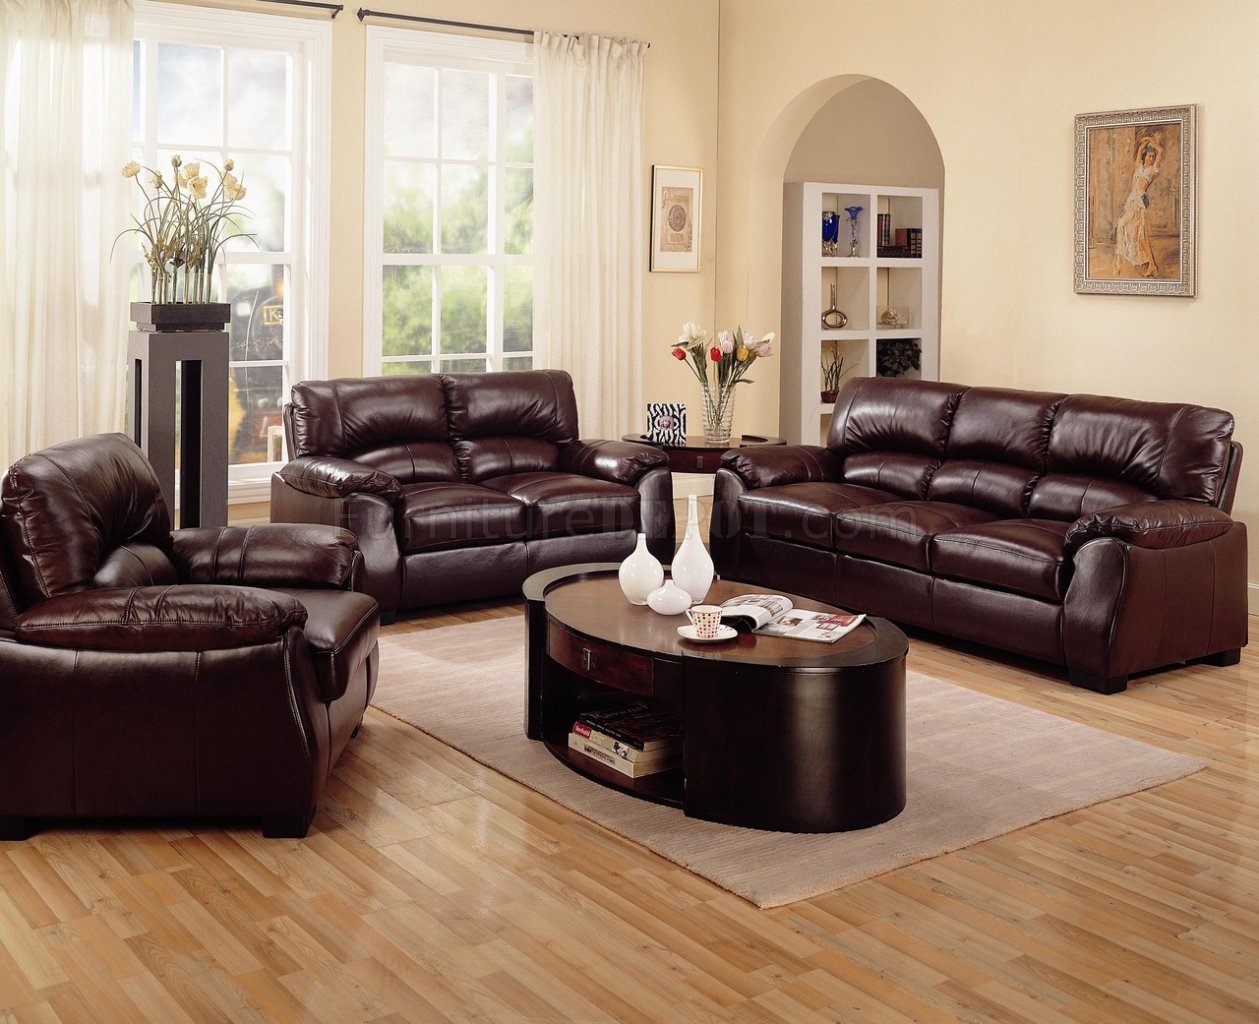 Rich Brown Leather Match Contemporary Living Room Sofa w